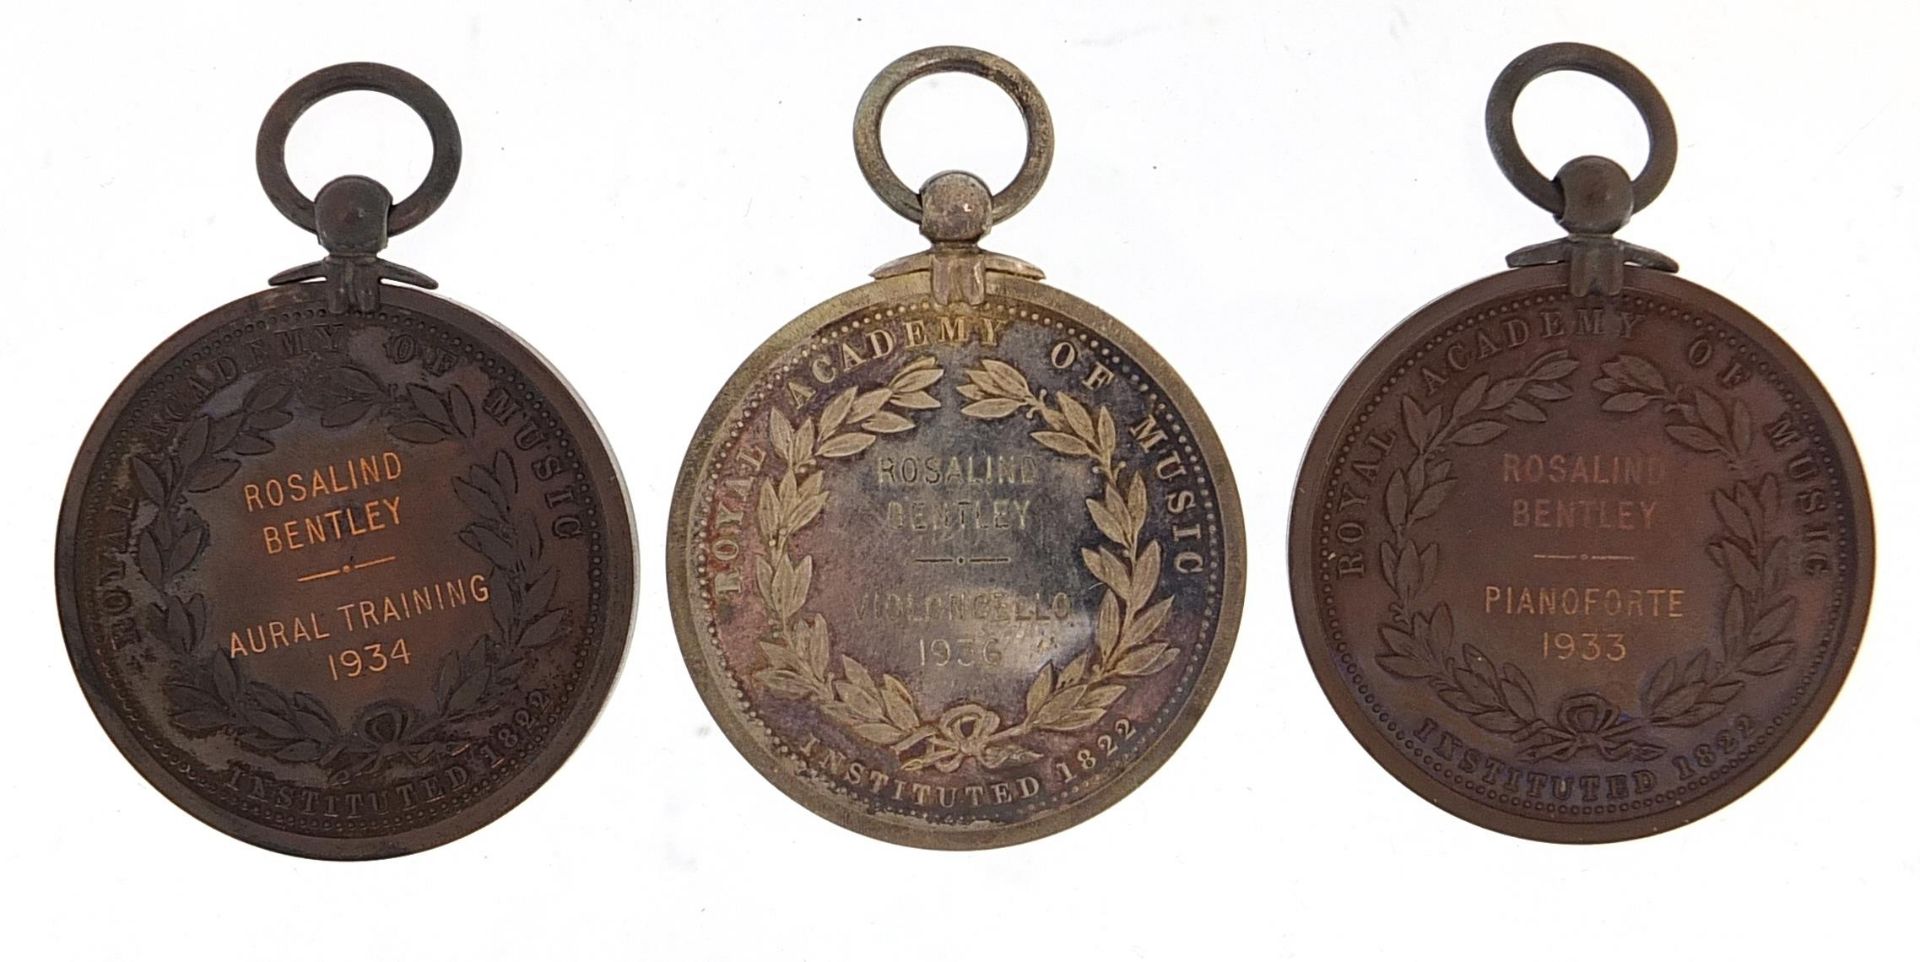 Three John Pinches London Royal Academy of Music medals for Rosalind Bentley housed in velvet - Image 3 of 4